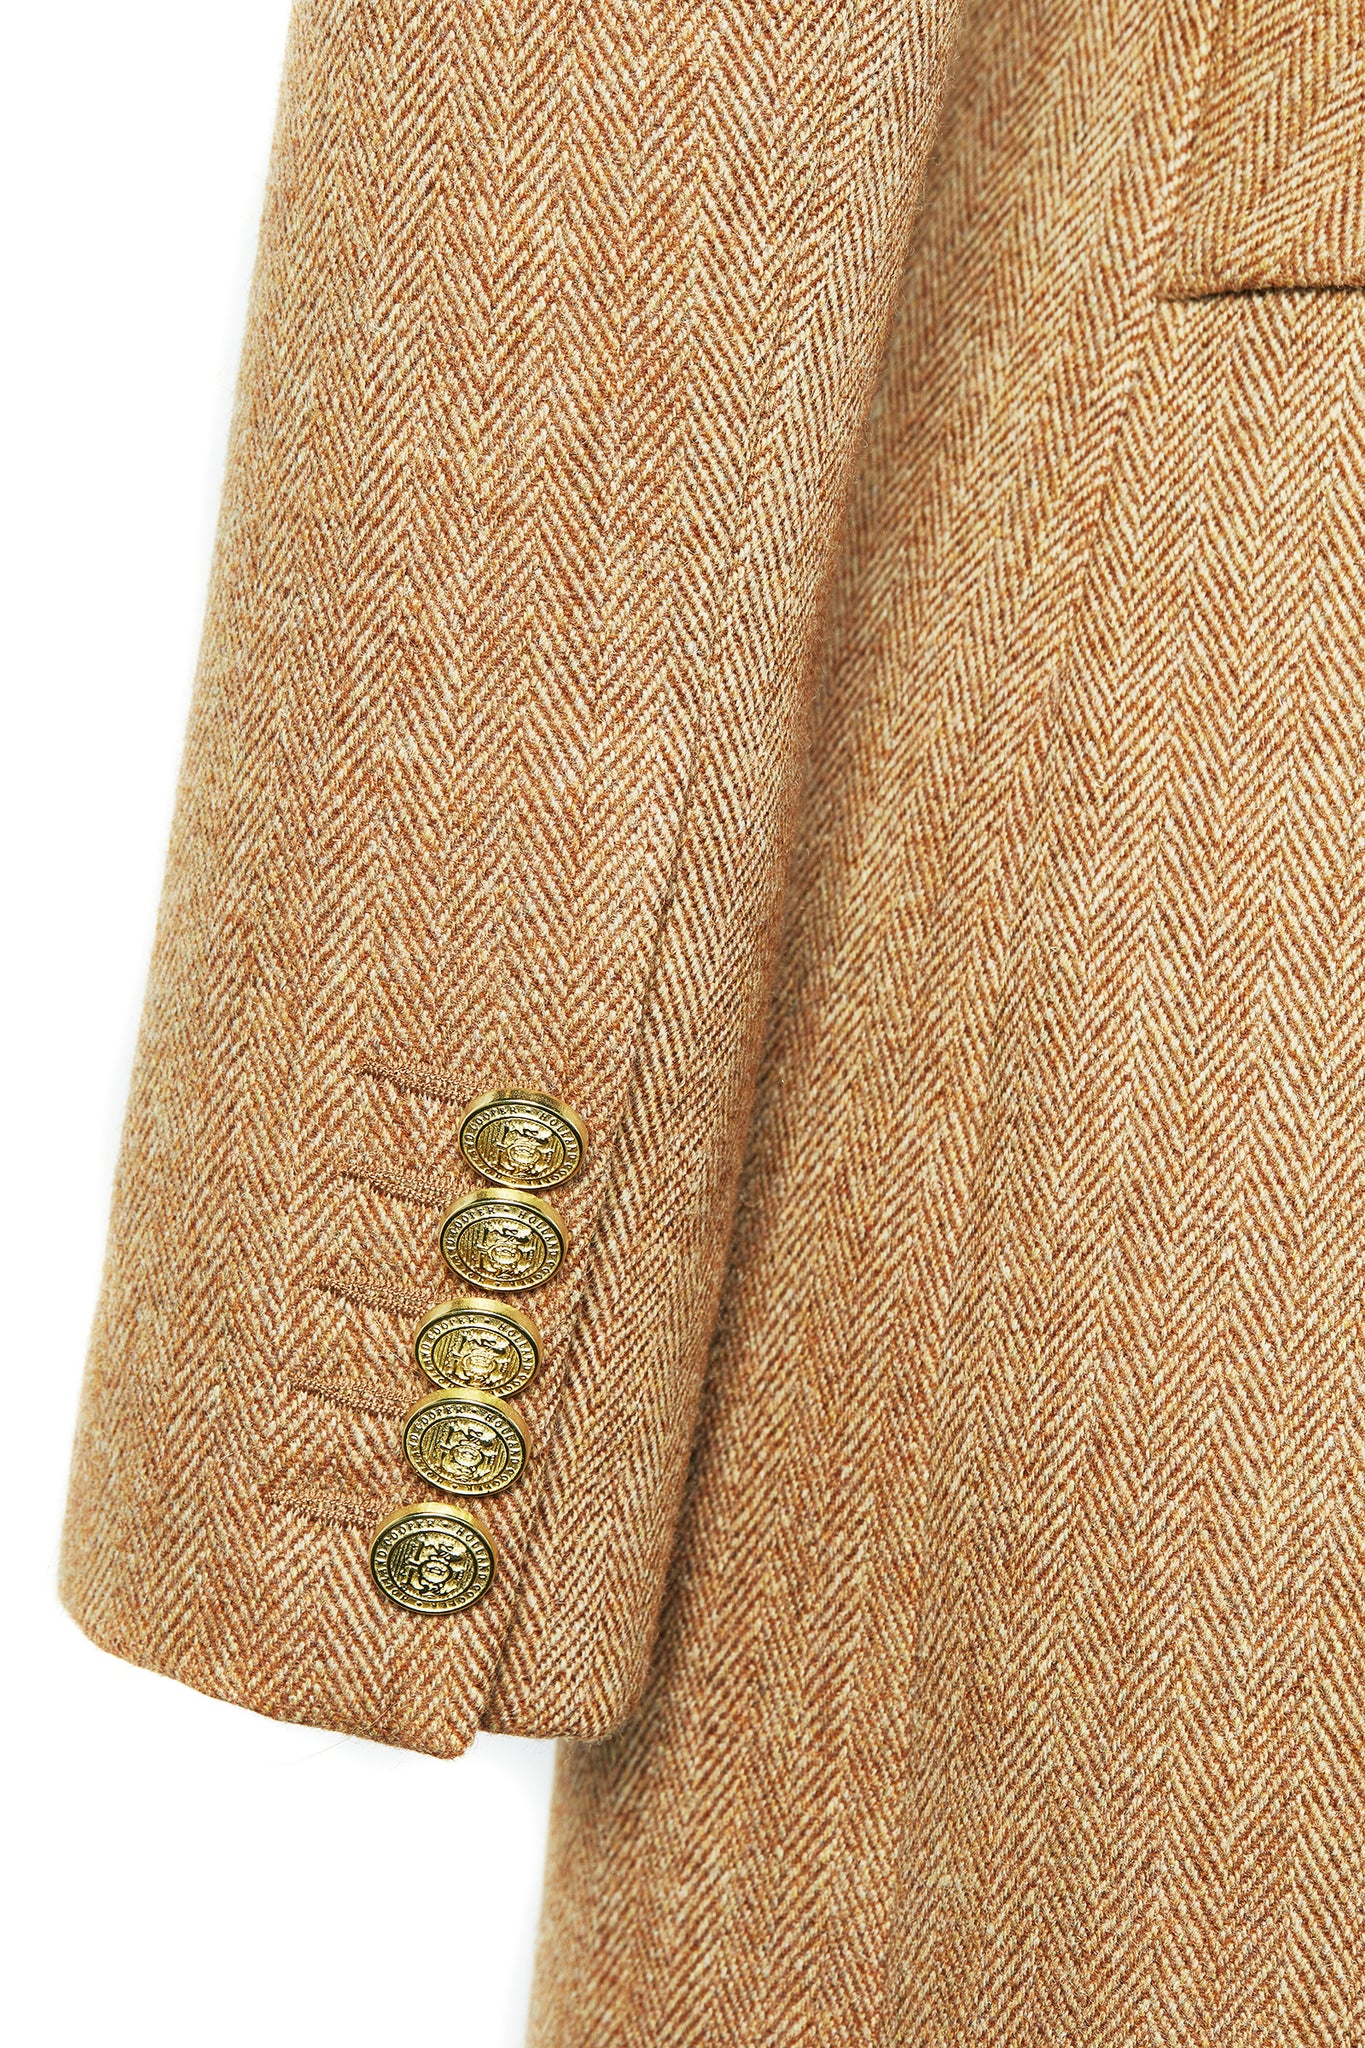 gold buttons on sleeve detail on womens brown tweed single breasted full length wool coat